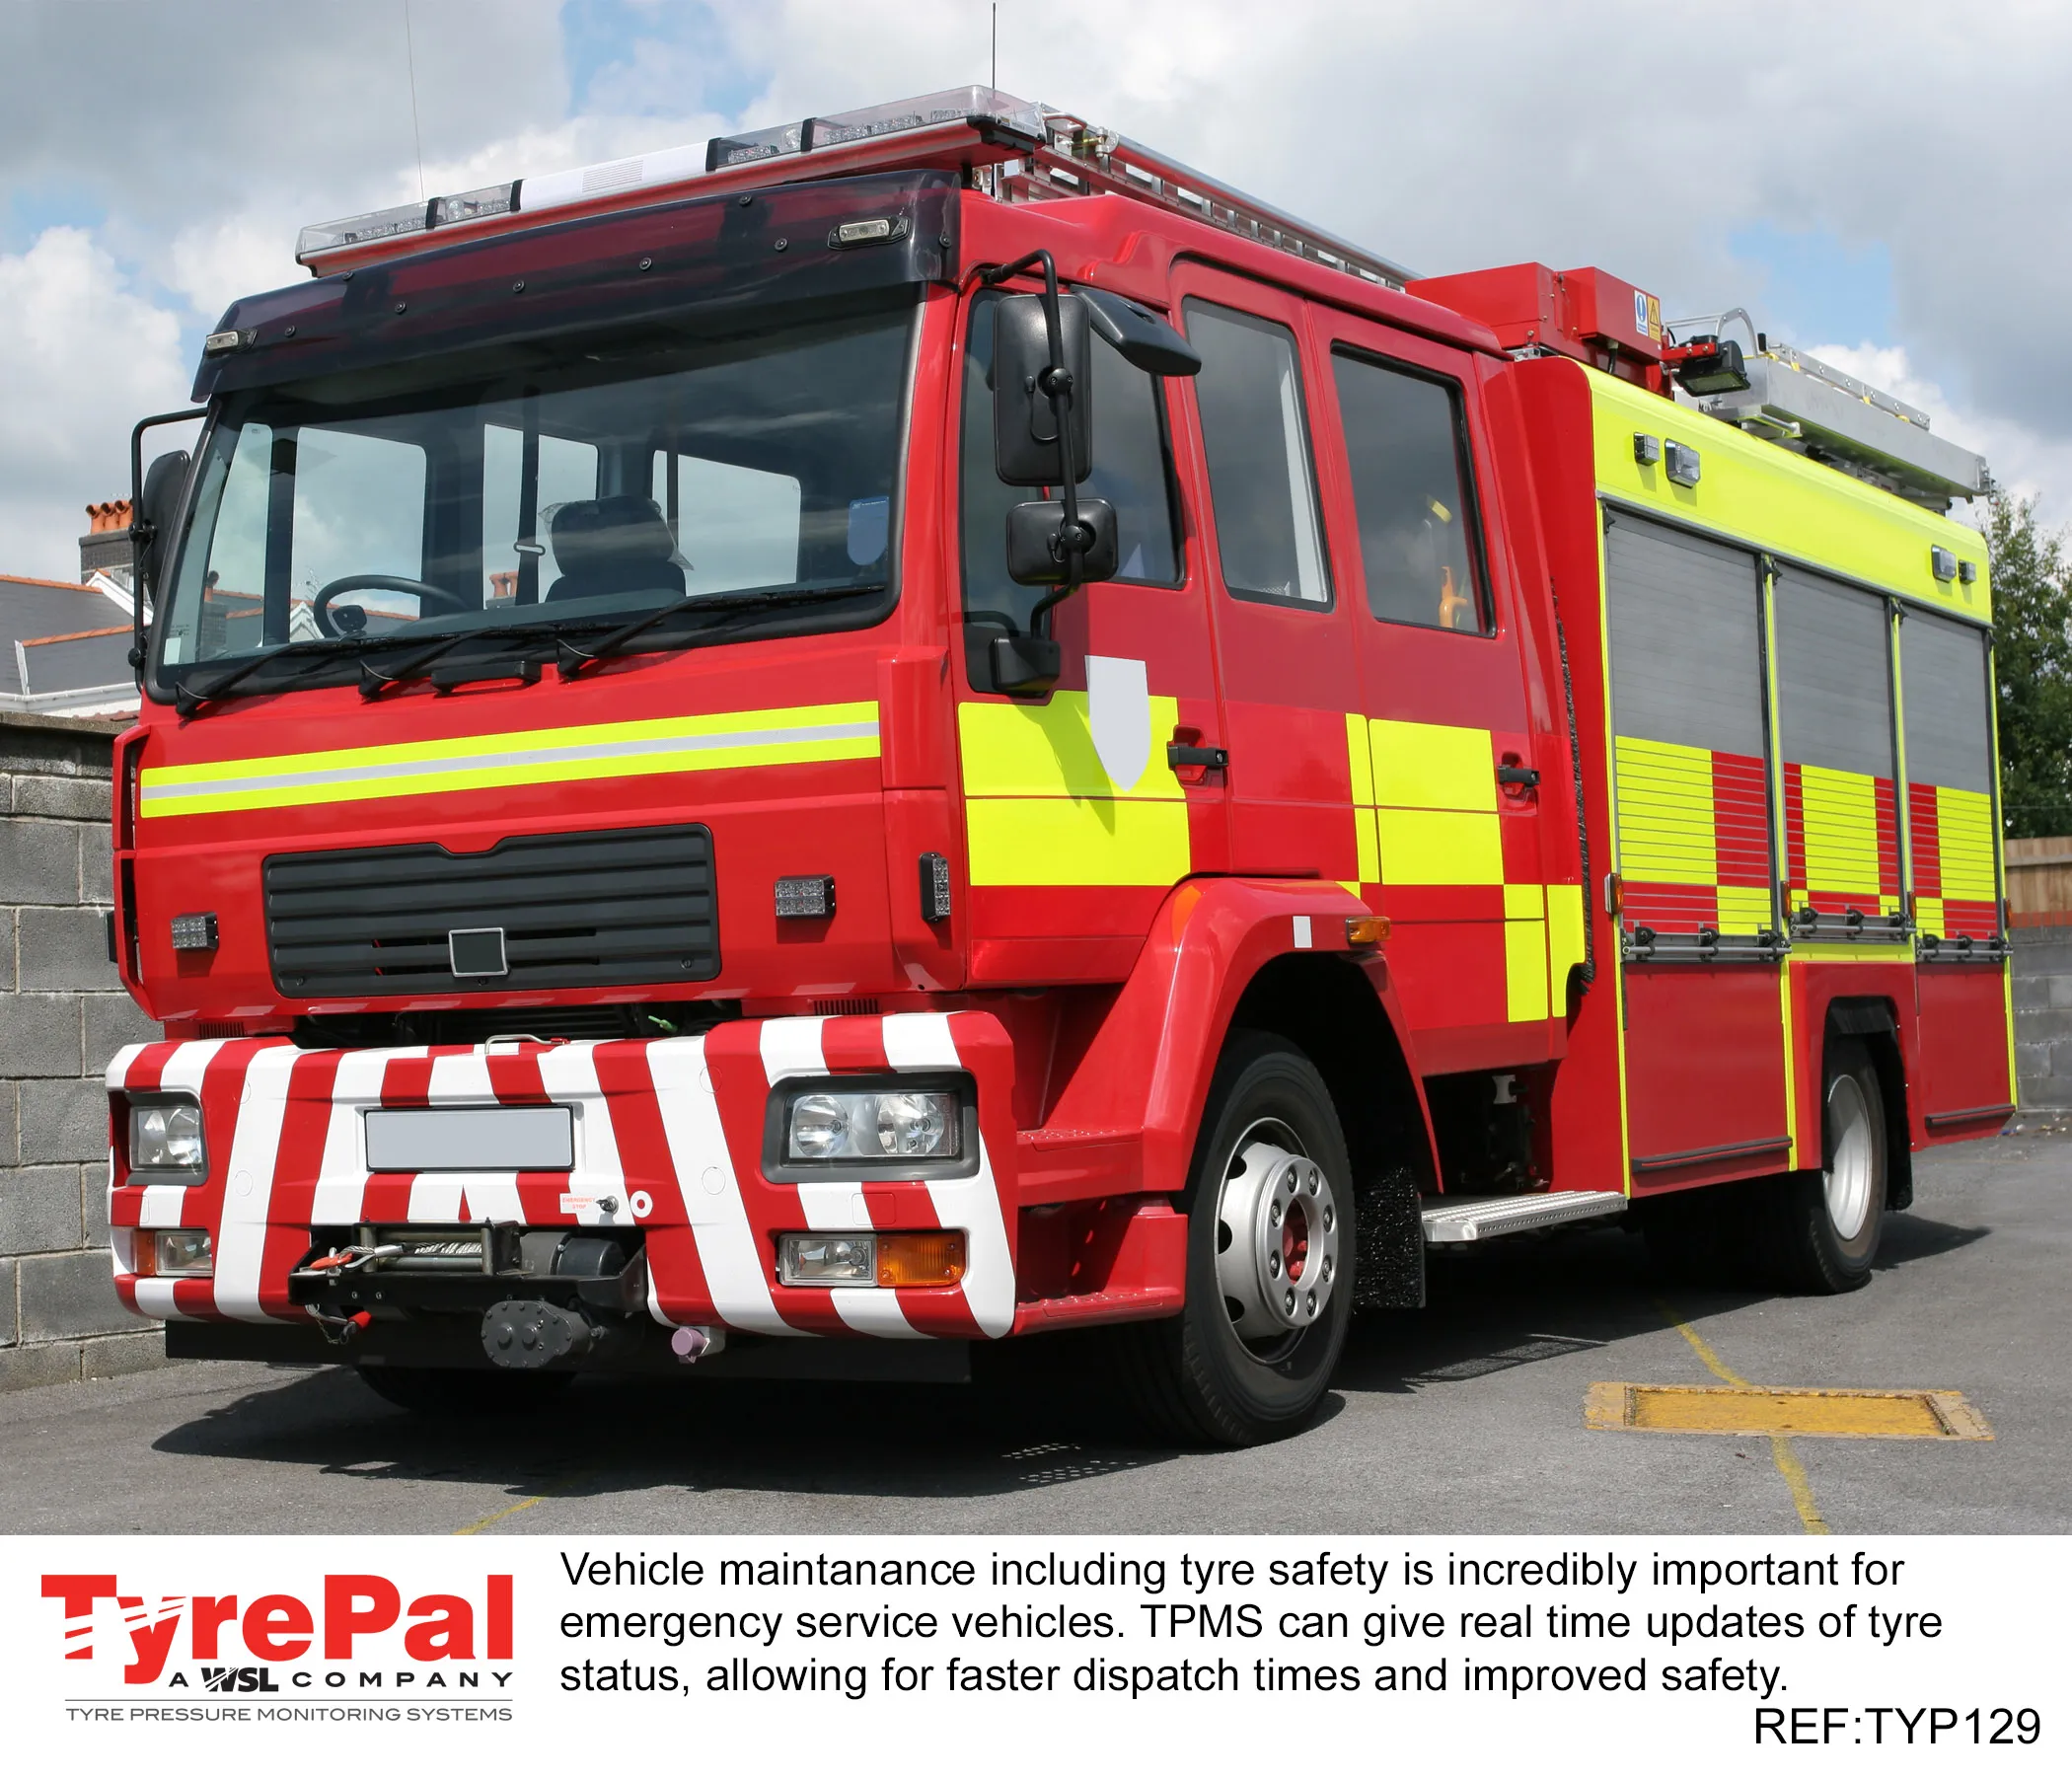 Tyre Safety for Emergency Services